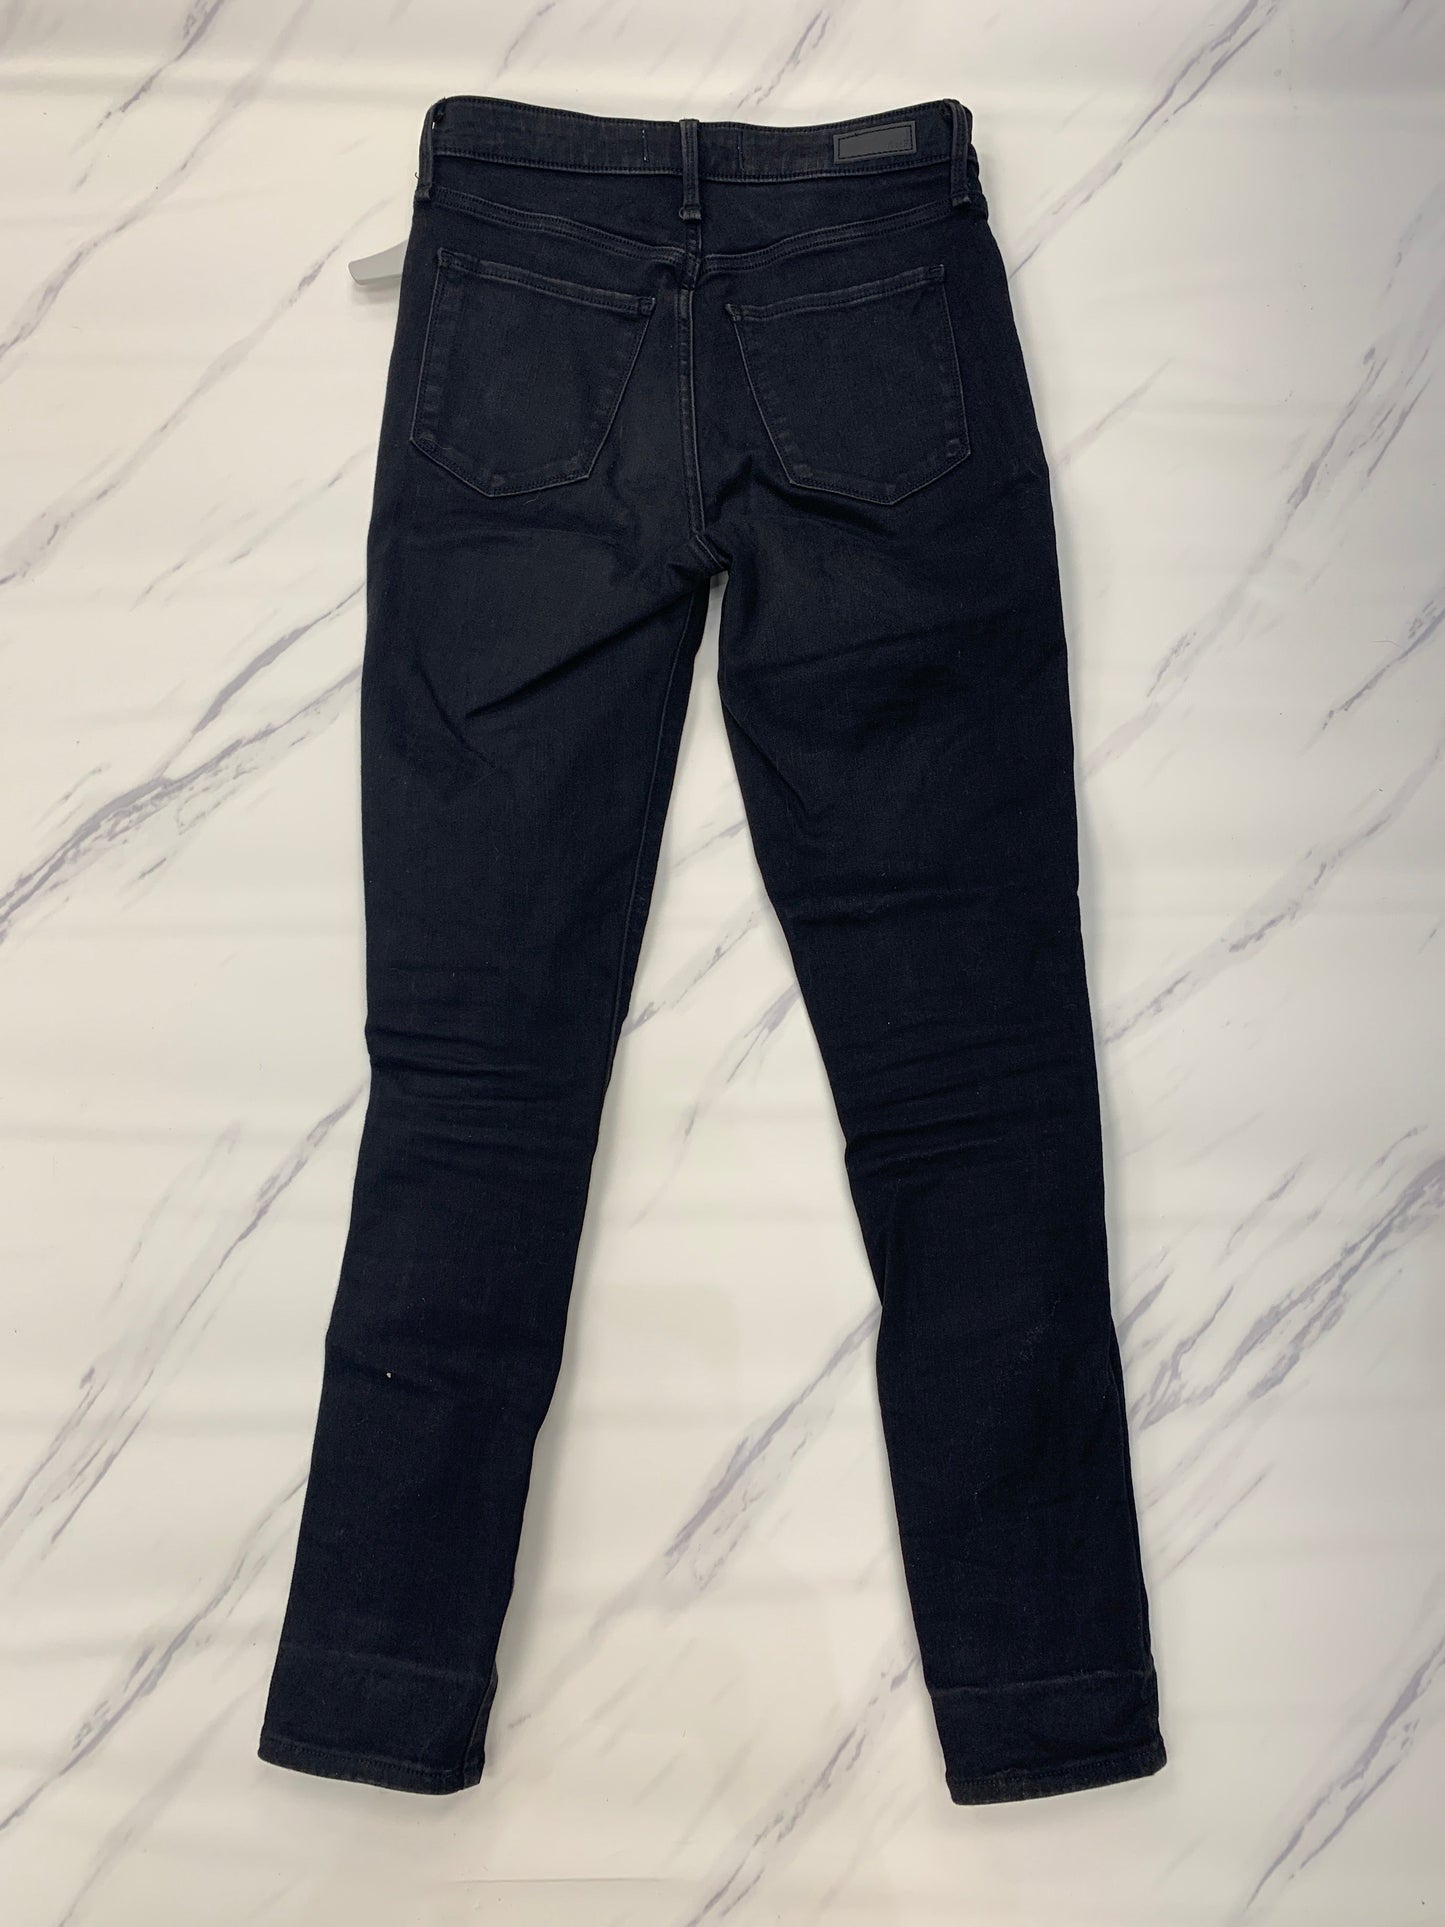 Black Jeans Skinny Abercrombie And Fitch, Size 4